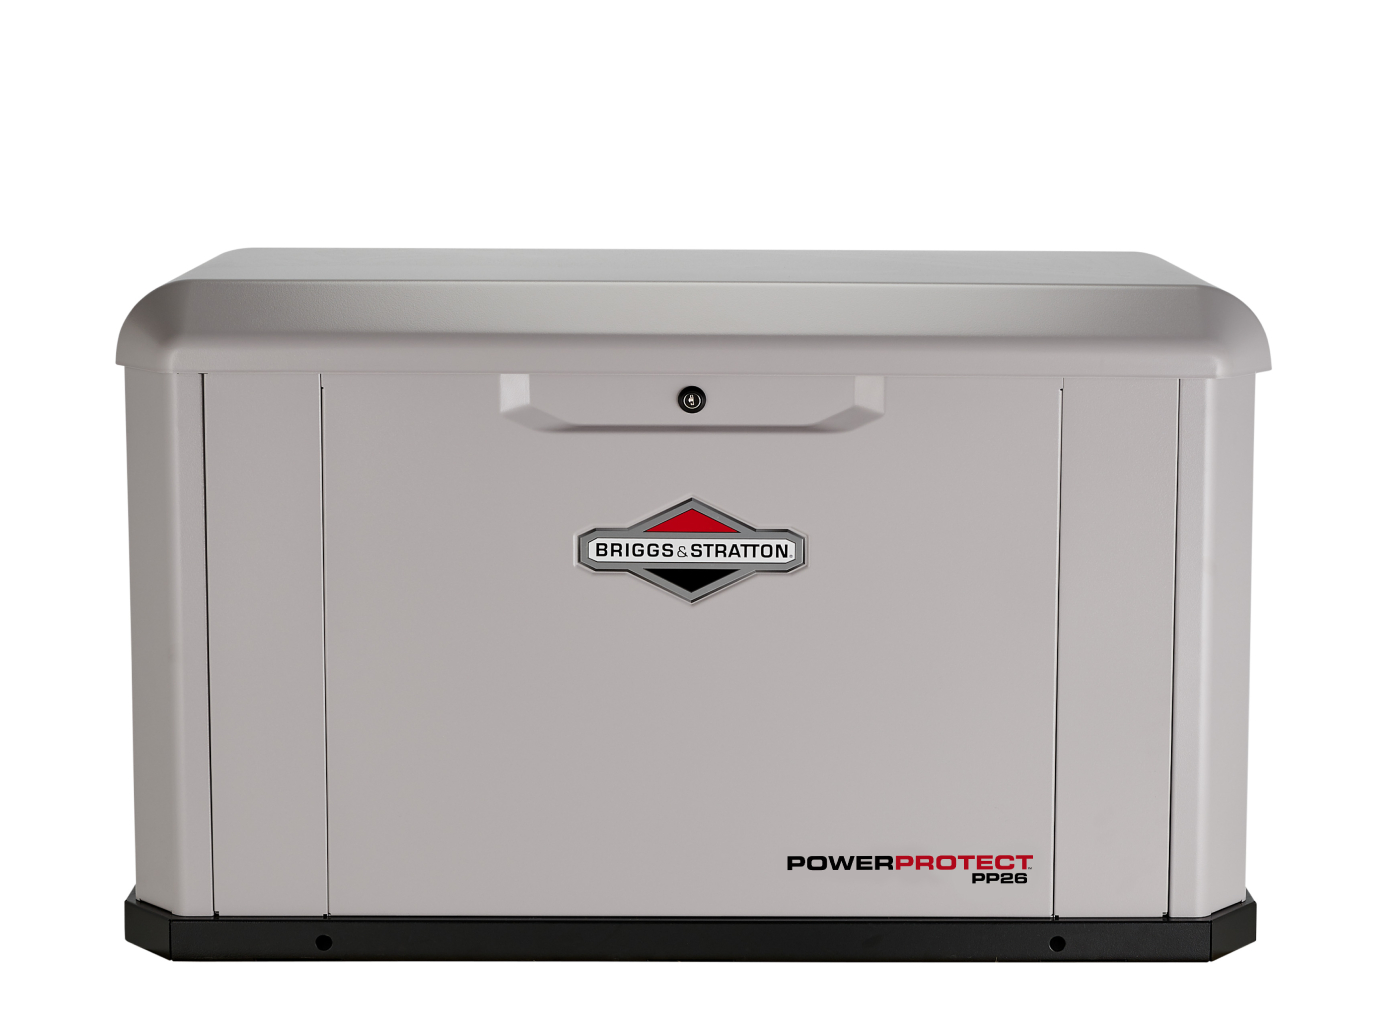 Overview Of Briggs And Stratton Home Generators